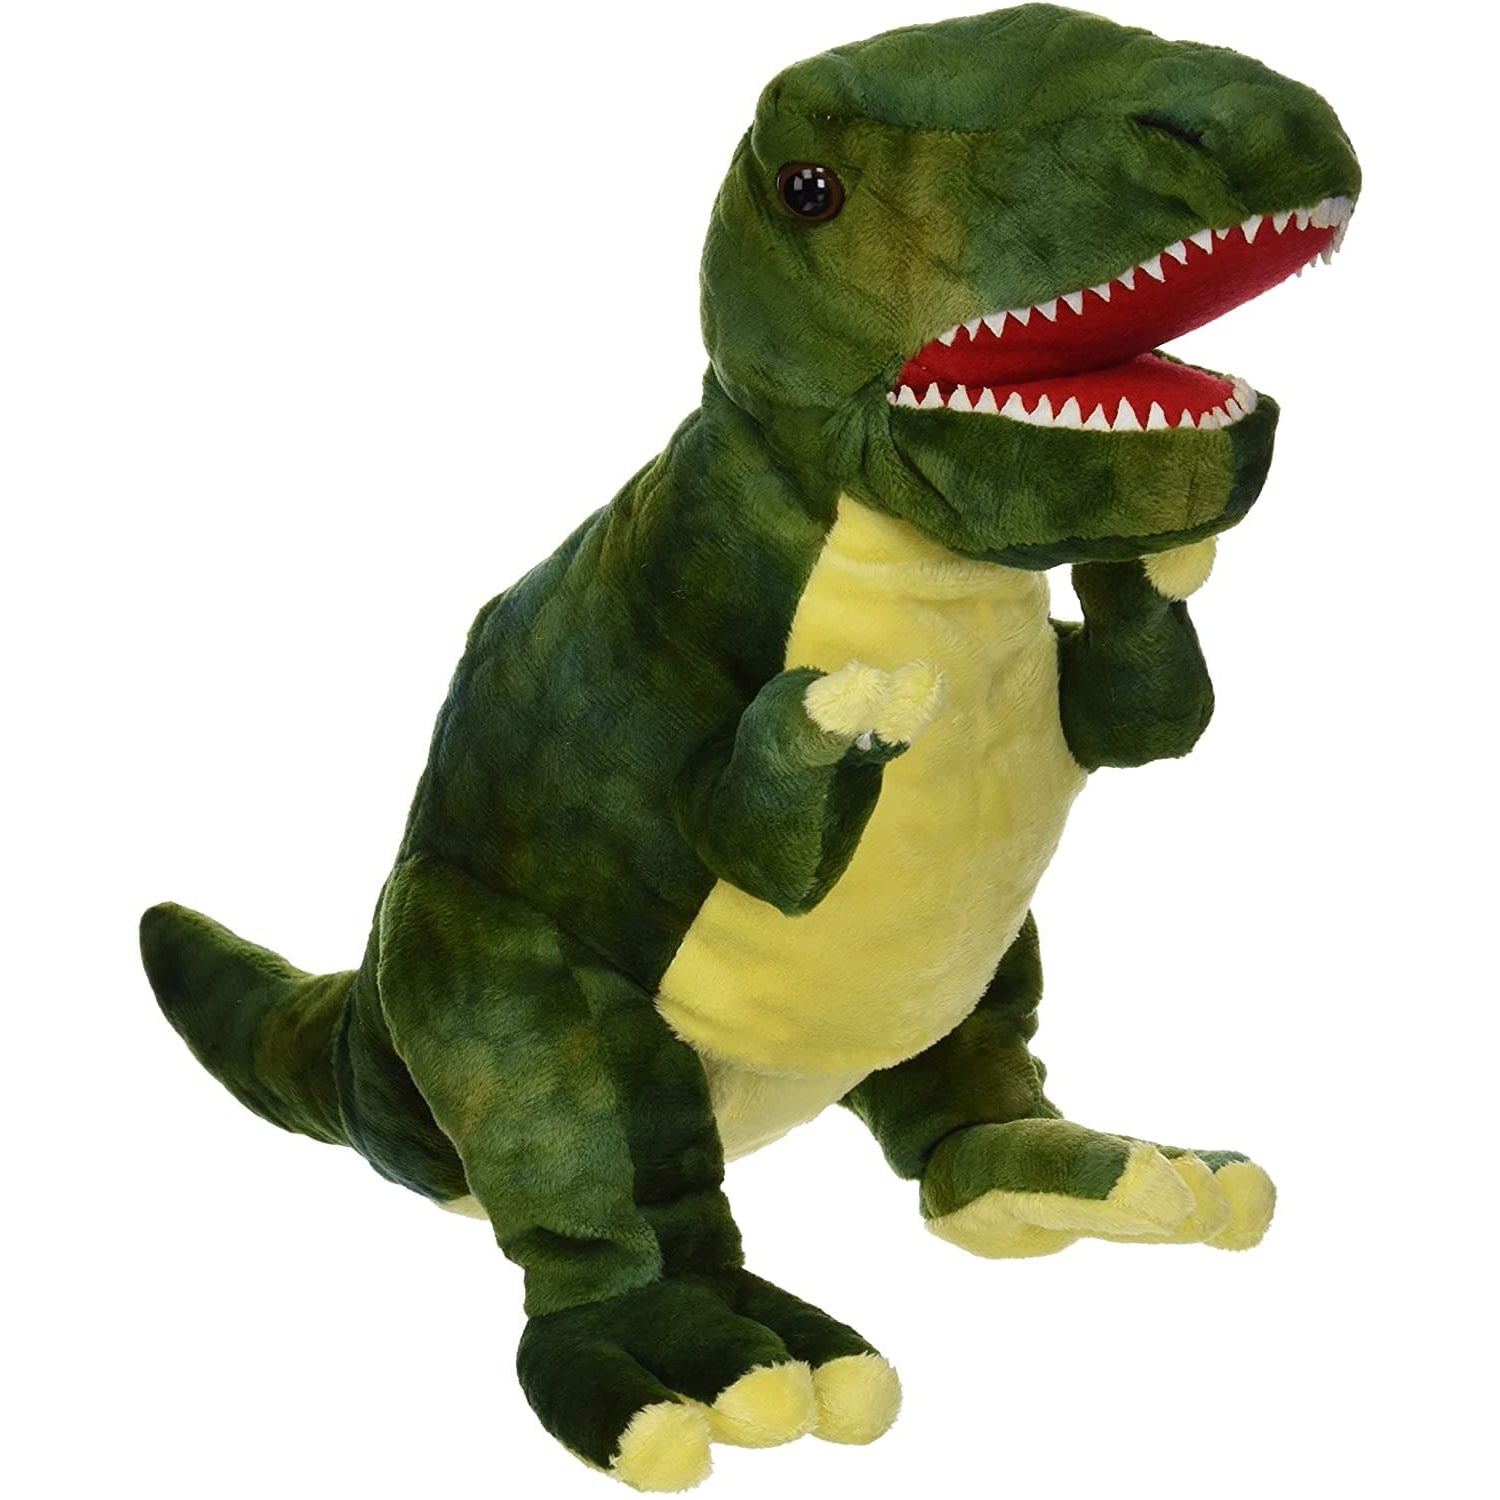 The Puppet Company-Baby T-Rex Puppet - Green-PC002902-Legacy Toys